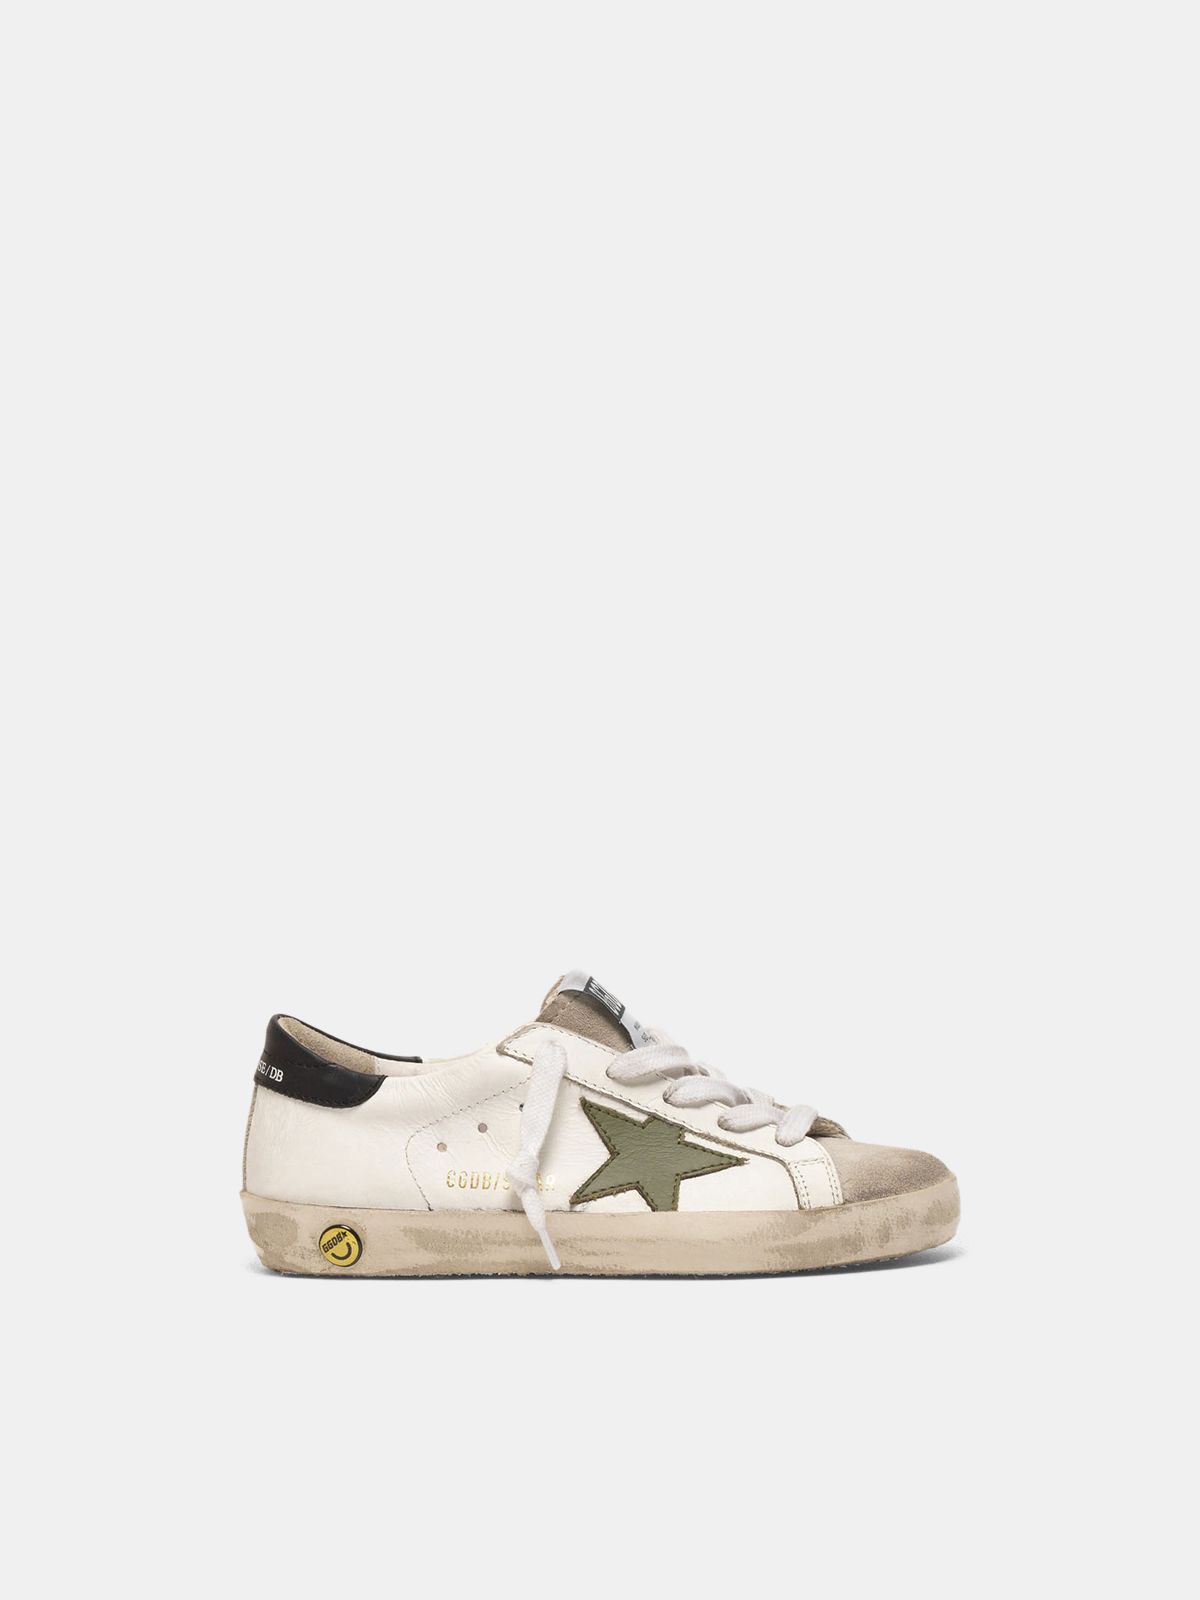 golden goose sneakers with black star